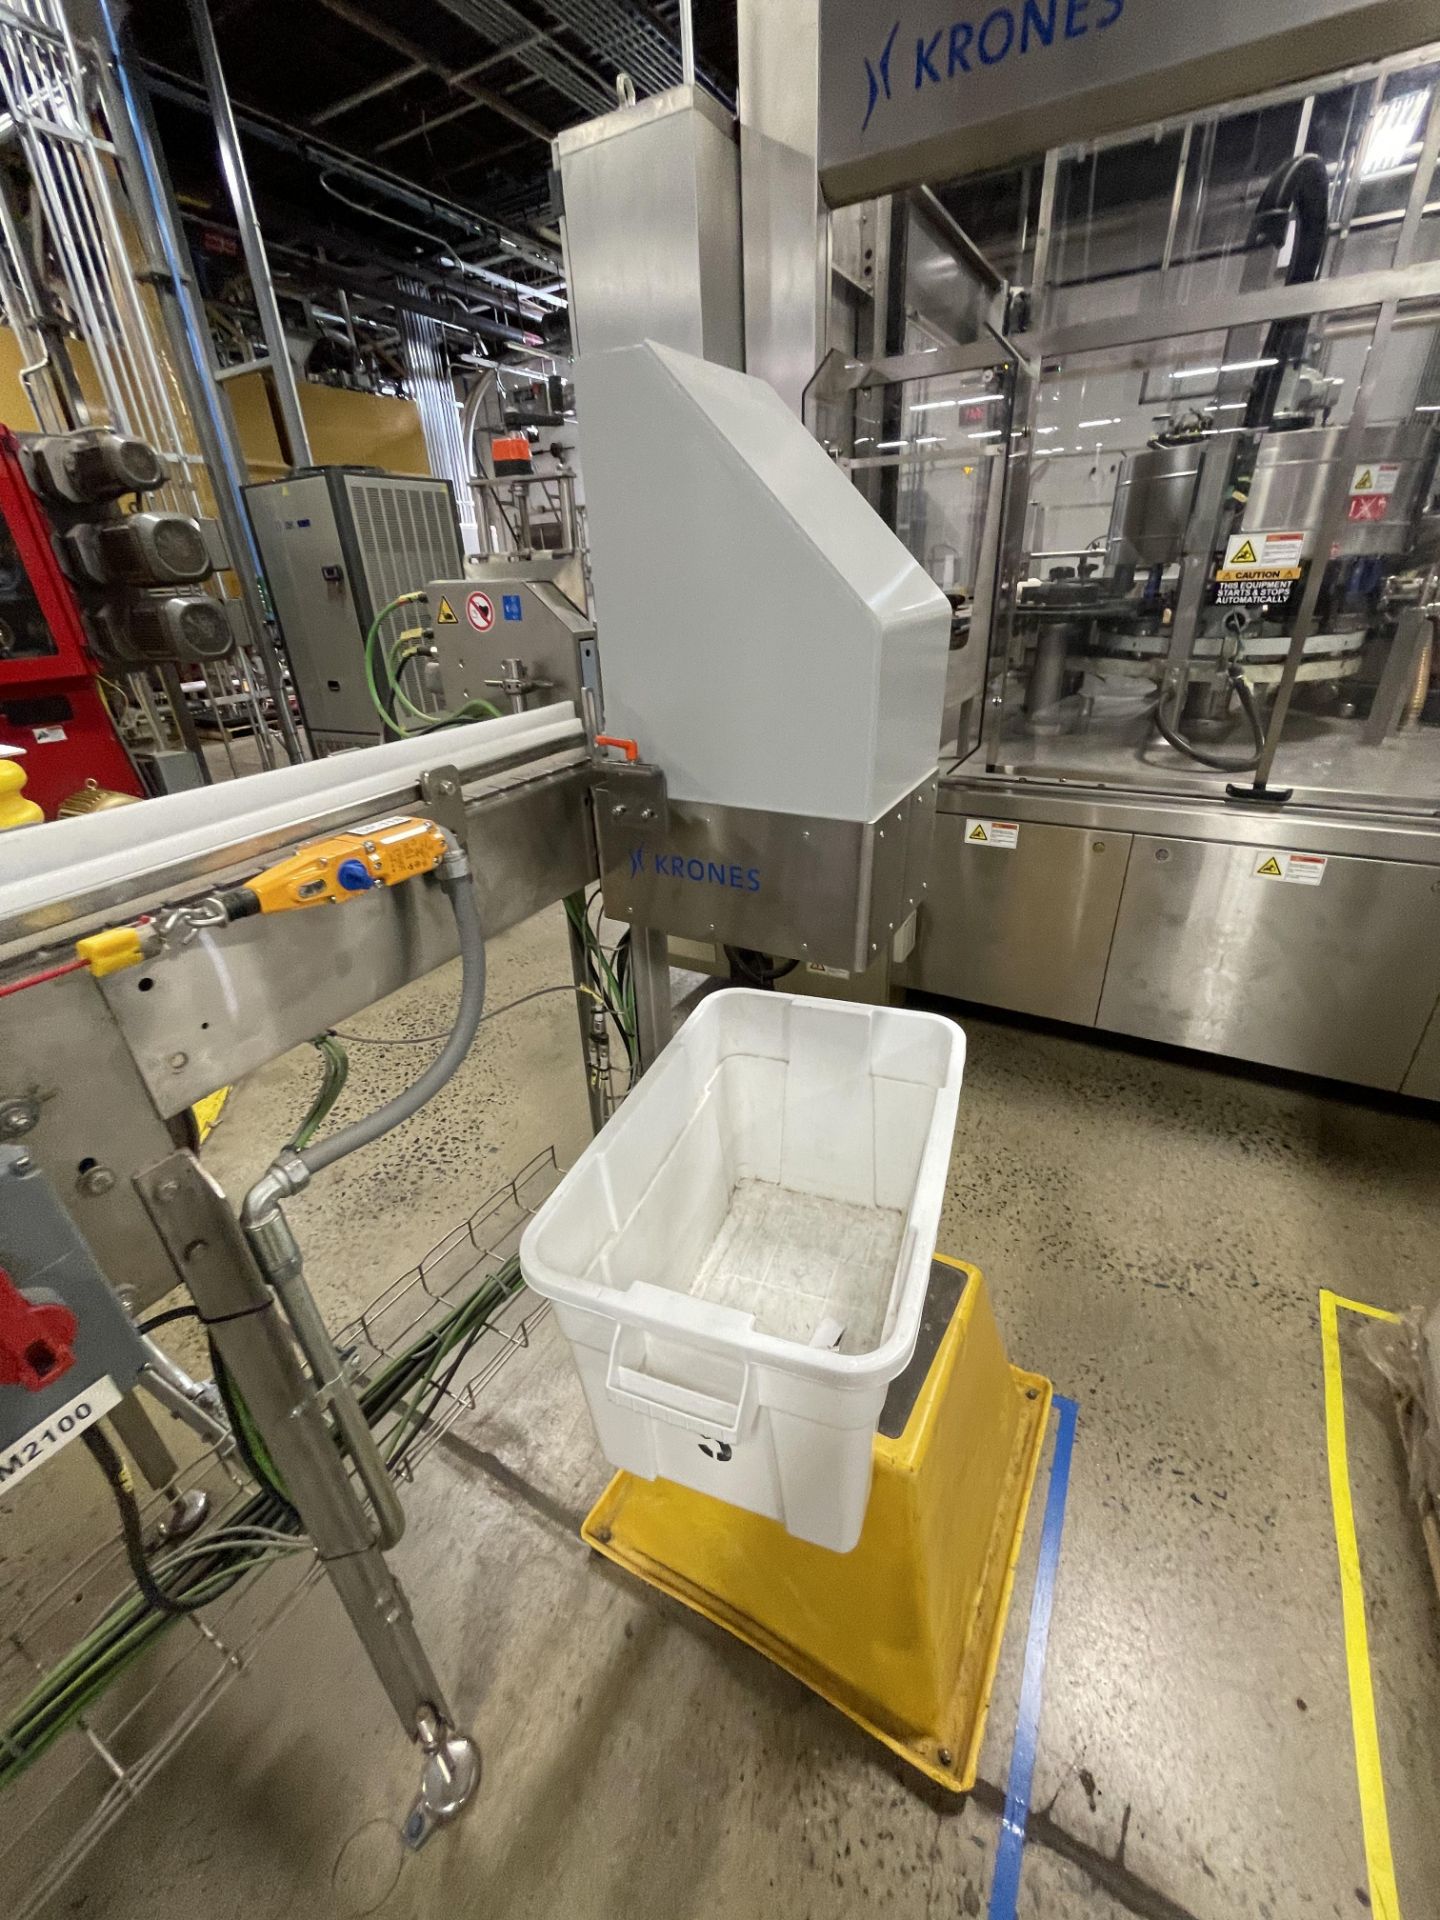 KRONES CHECKMAT INSPECTION SYSTEM, TYPE CHECKMAT 7.5 (2019 MFG) - Image 10 of 10